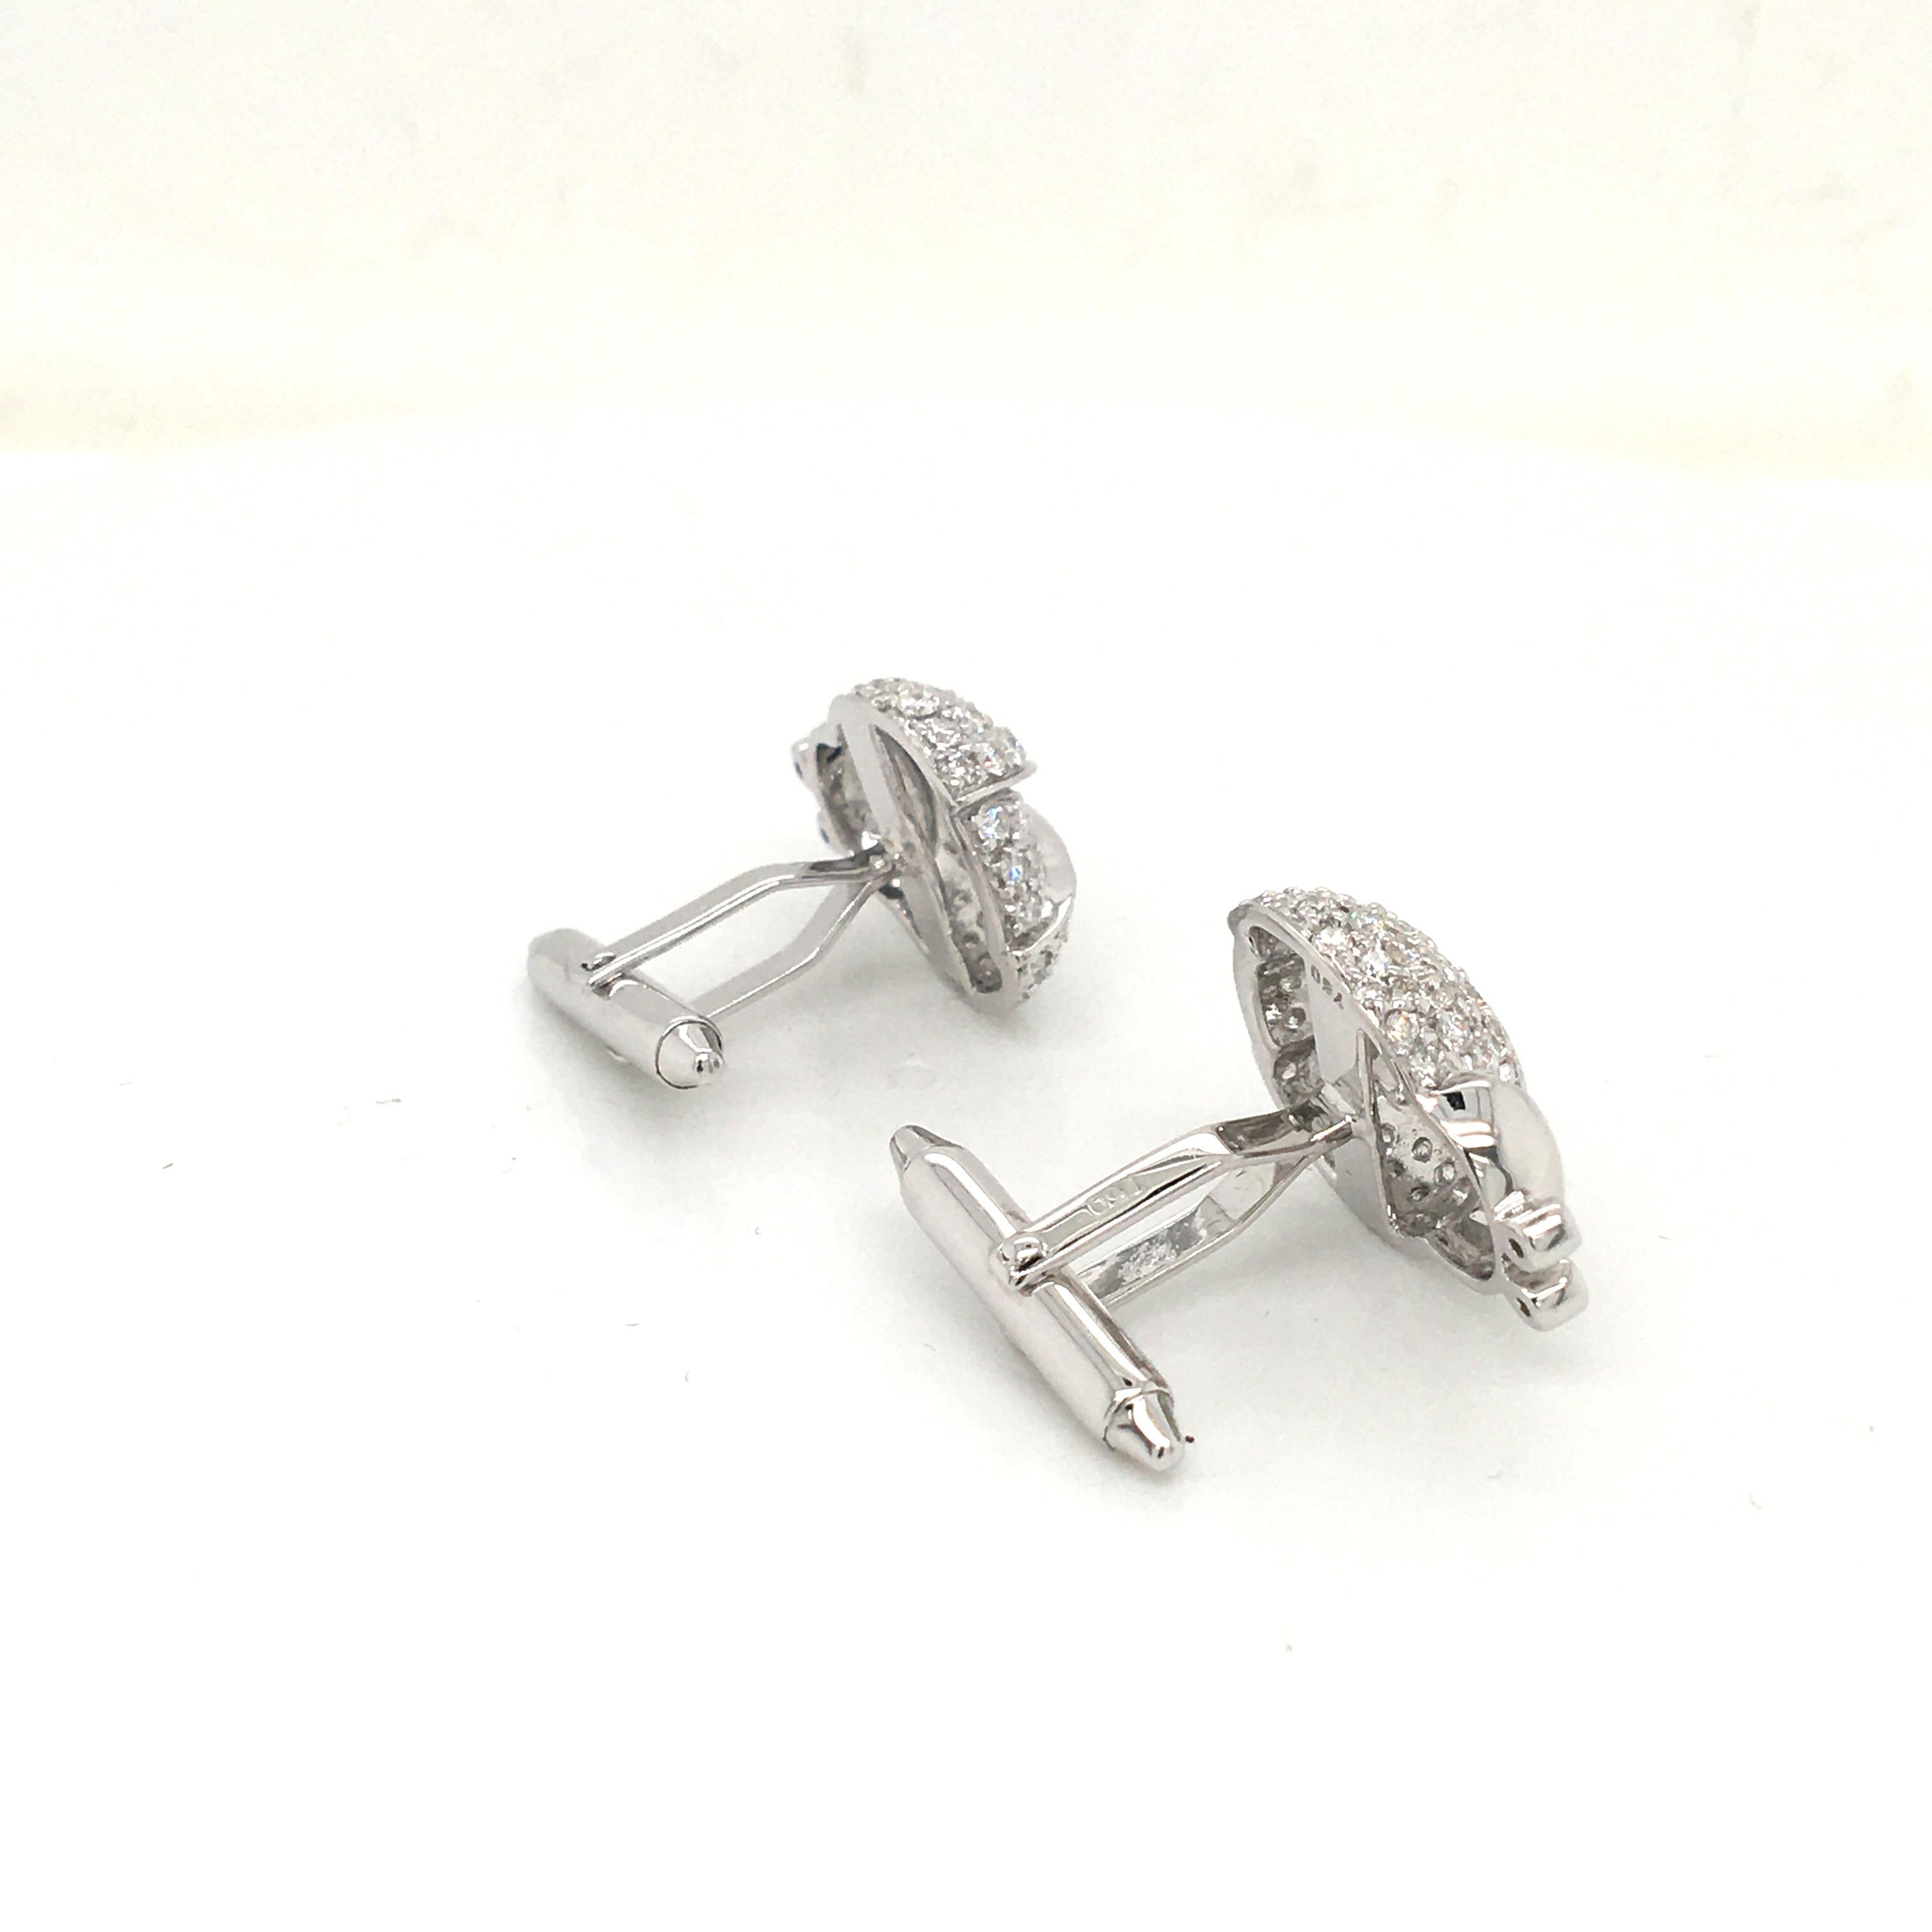 18 Kt white gold cufflinks
designed as a Ladybug
total diamond 1.63 round cut color G clarity VS
Made in Italy come in a Box

